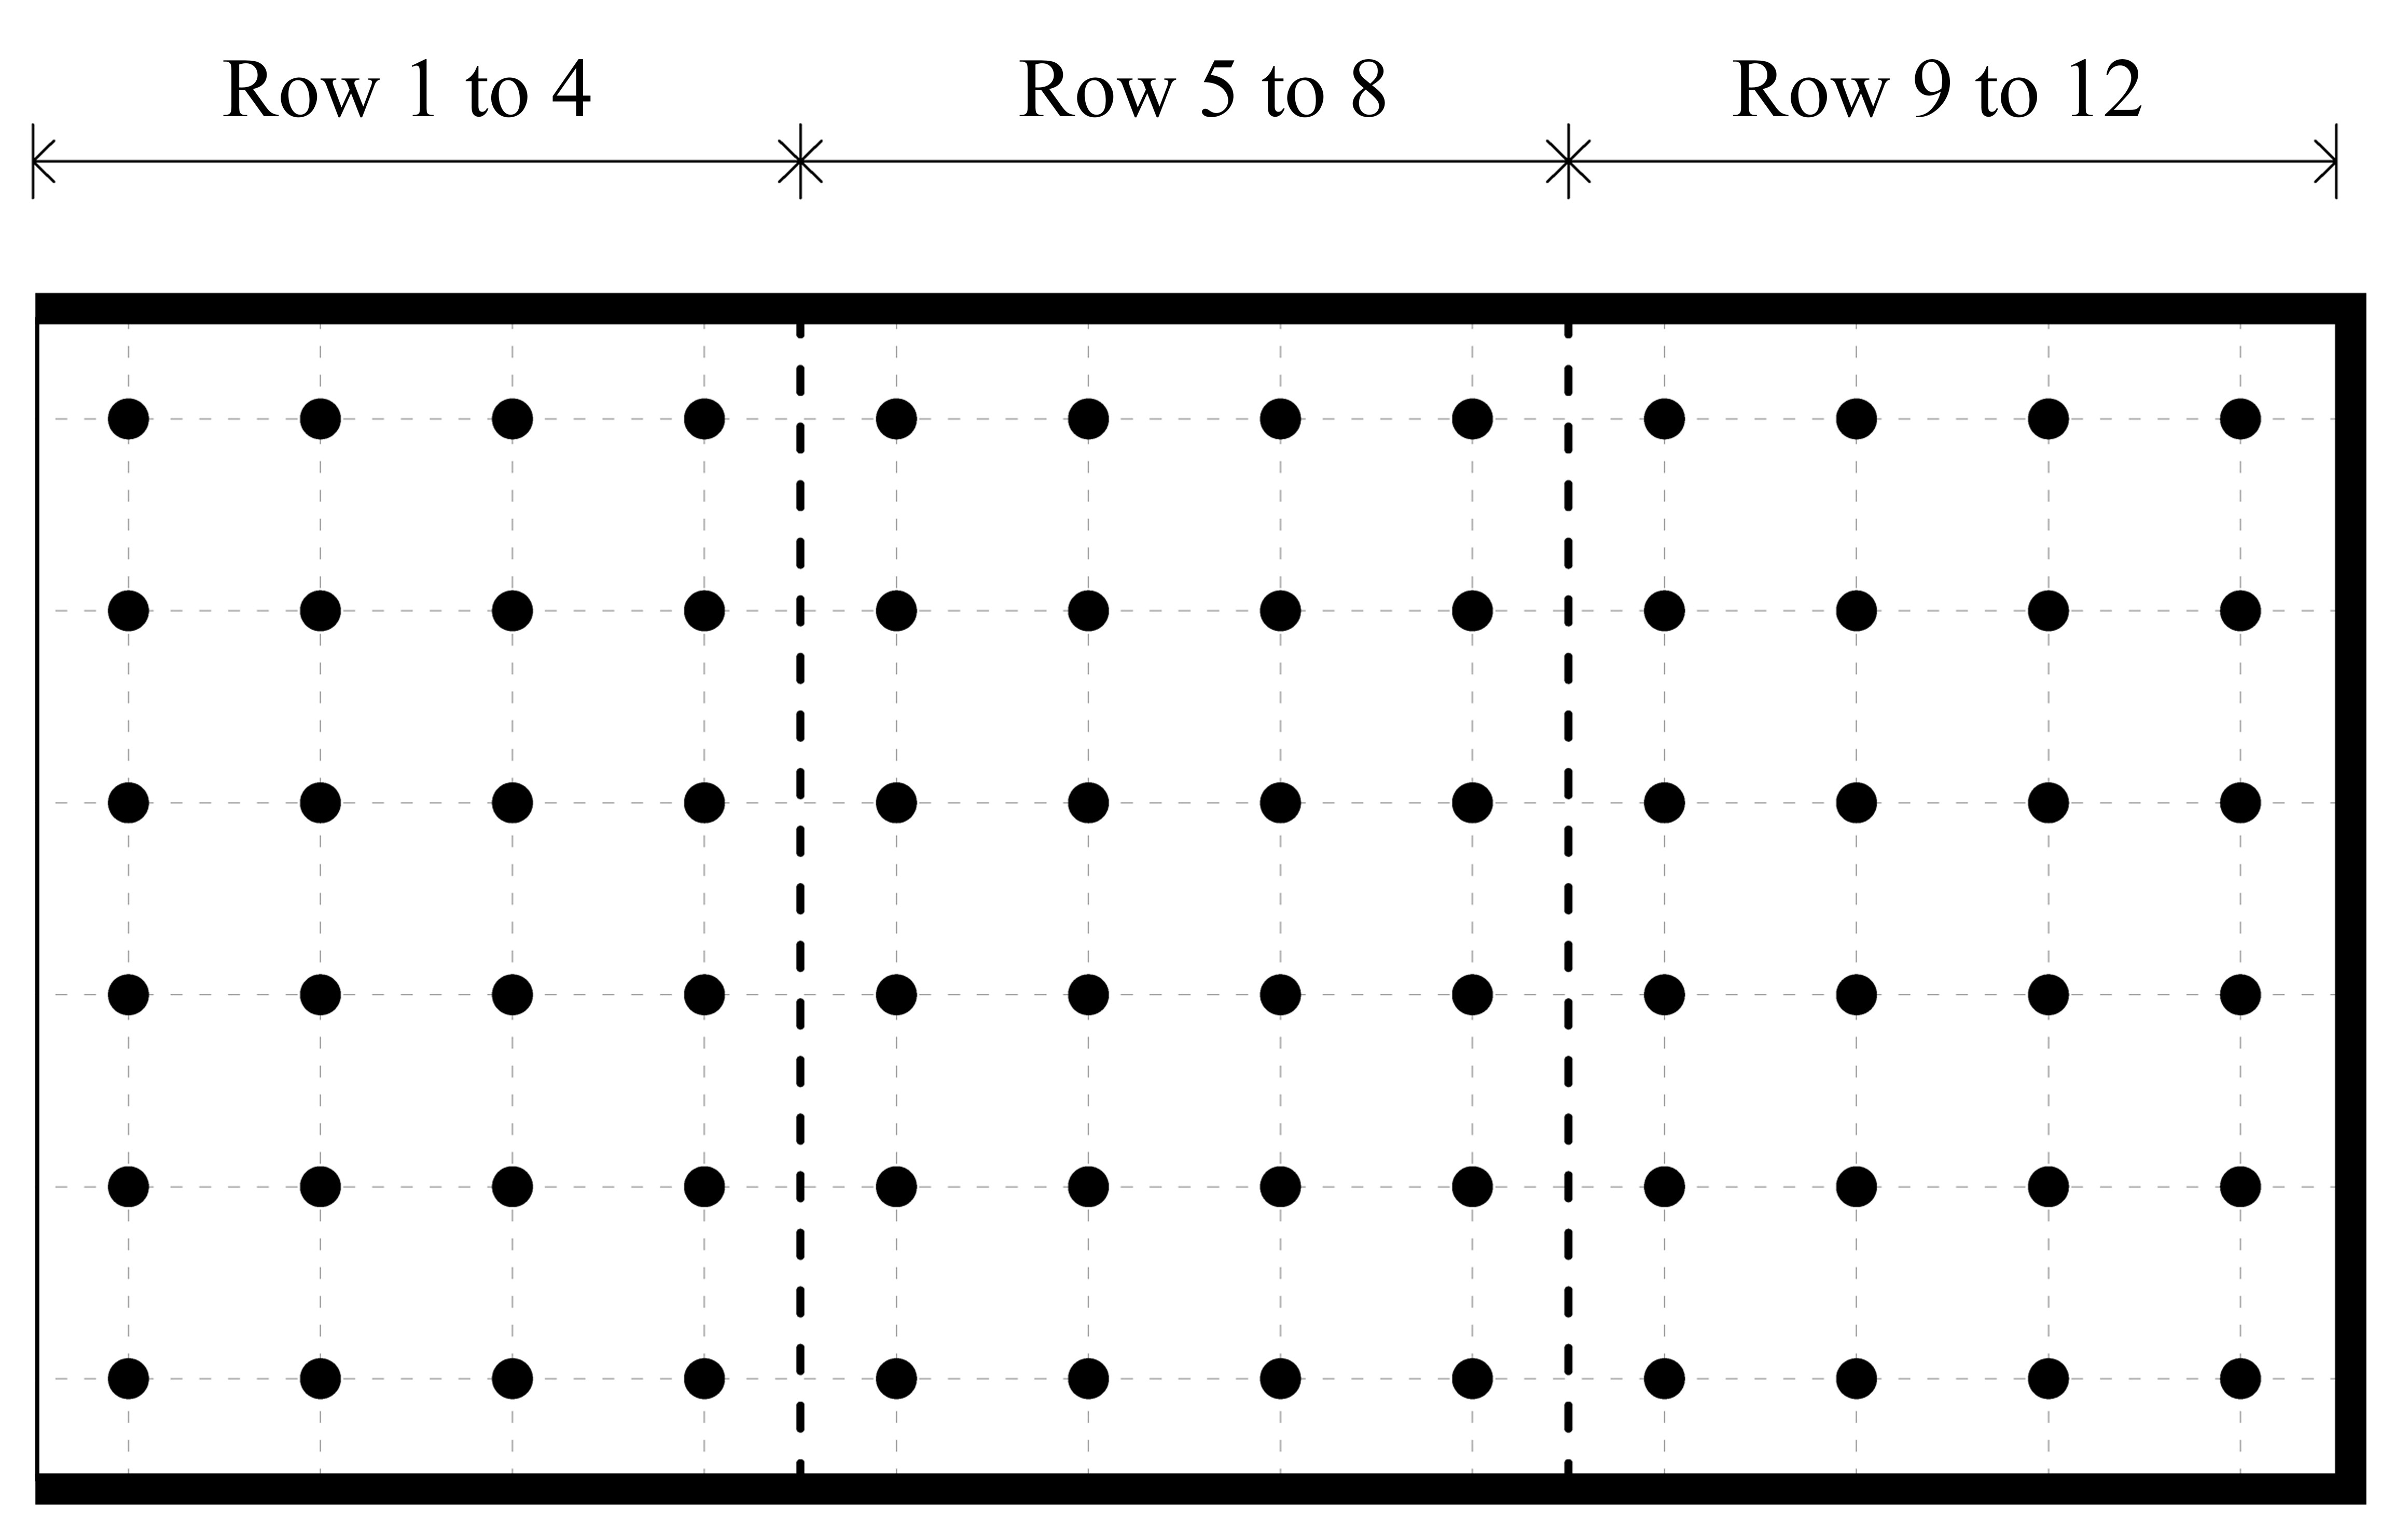 Division of room into three areas based on distance from the room opening: Row 1 to 4, Row 5 to 8, and Row 9 to 12.